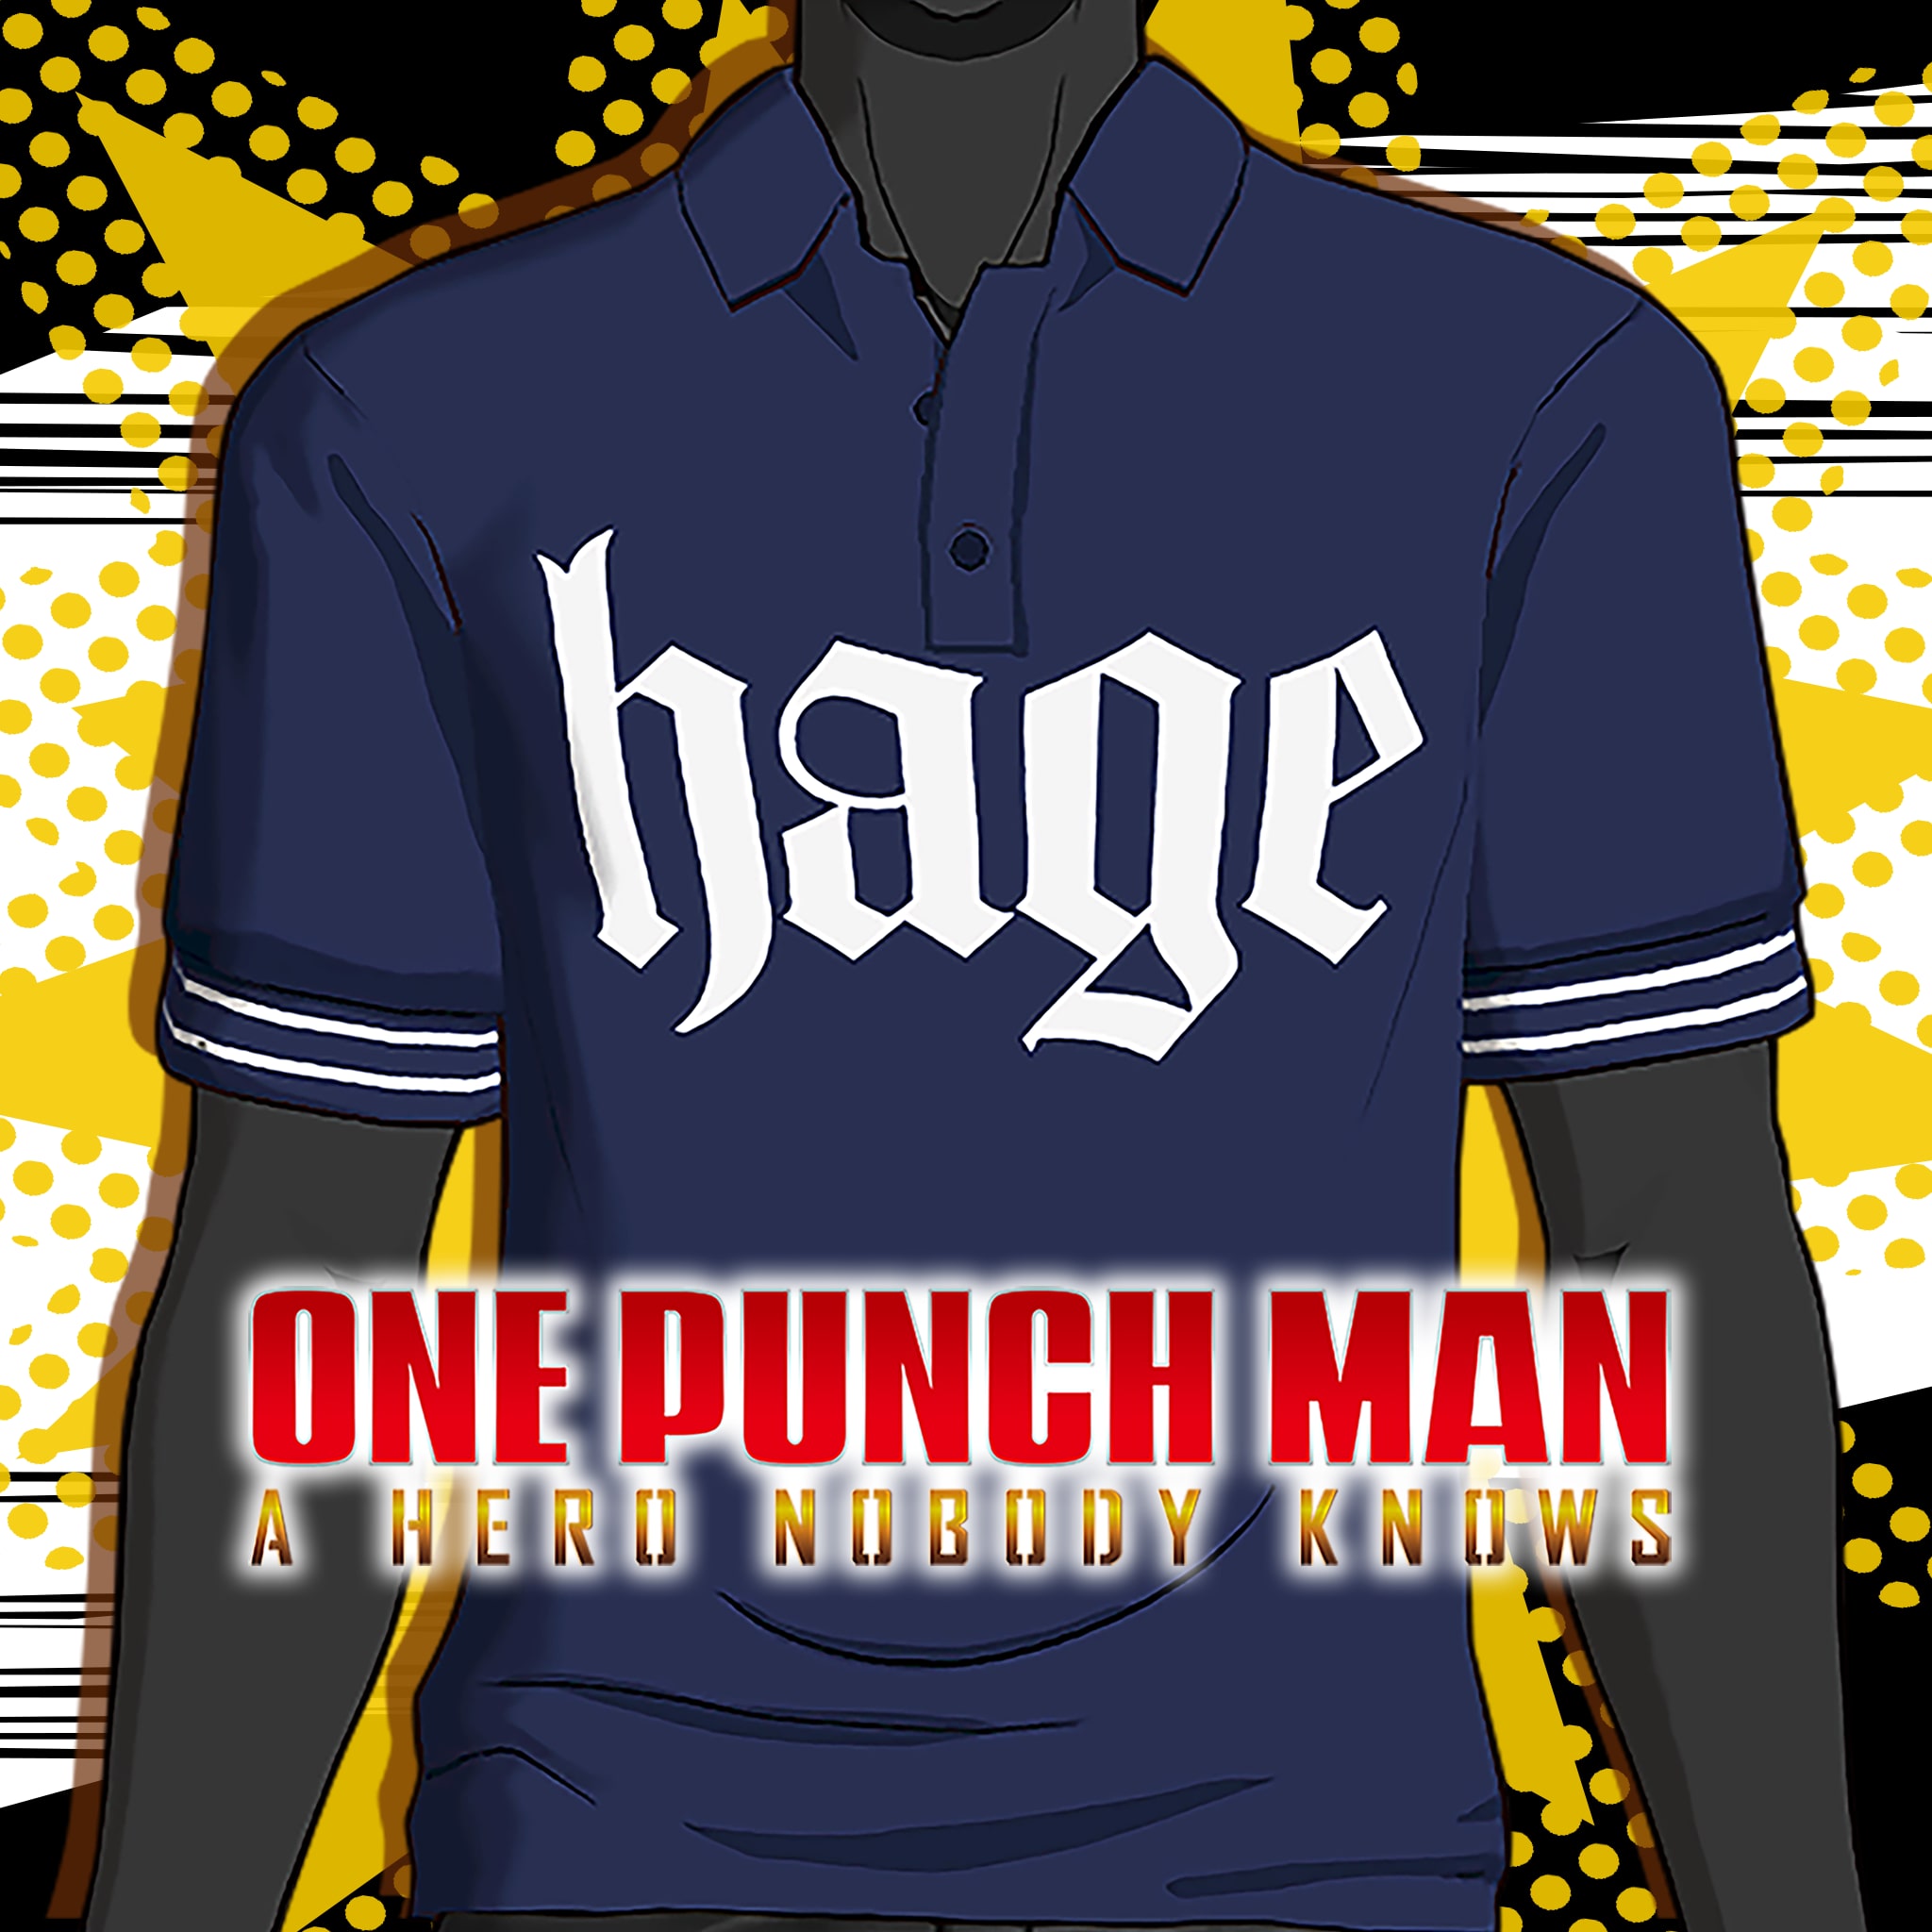 ONE PUNCH MAN - A HERO NOBODY KNOWS Camisa Polo 'Hage'